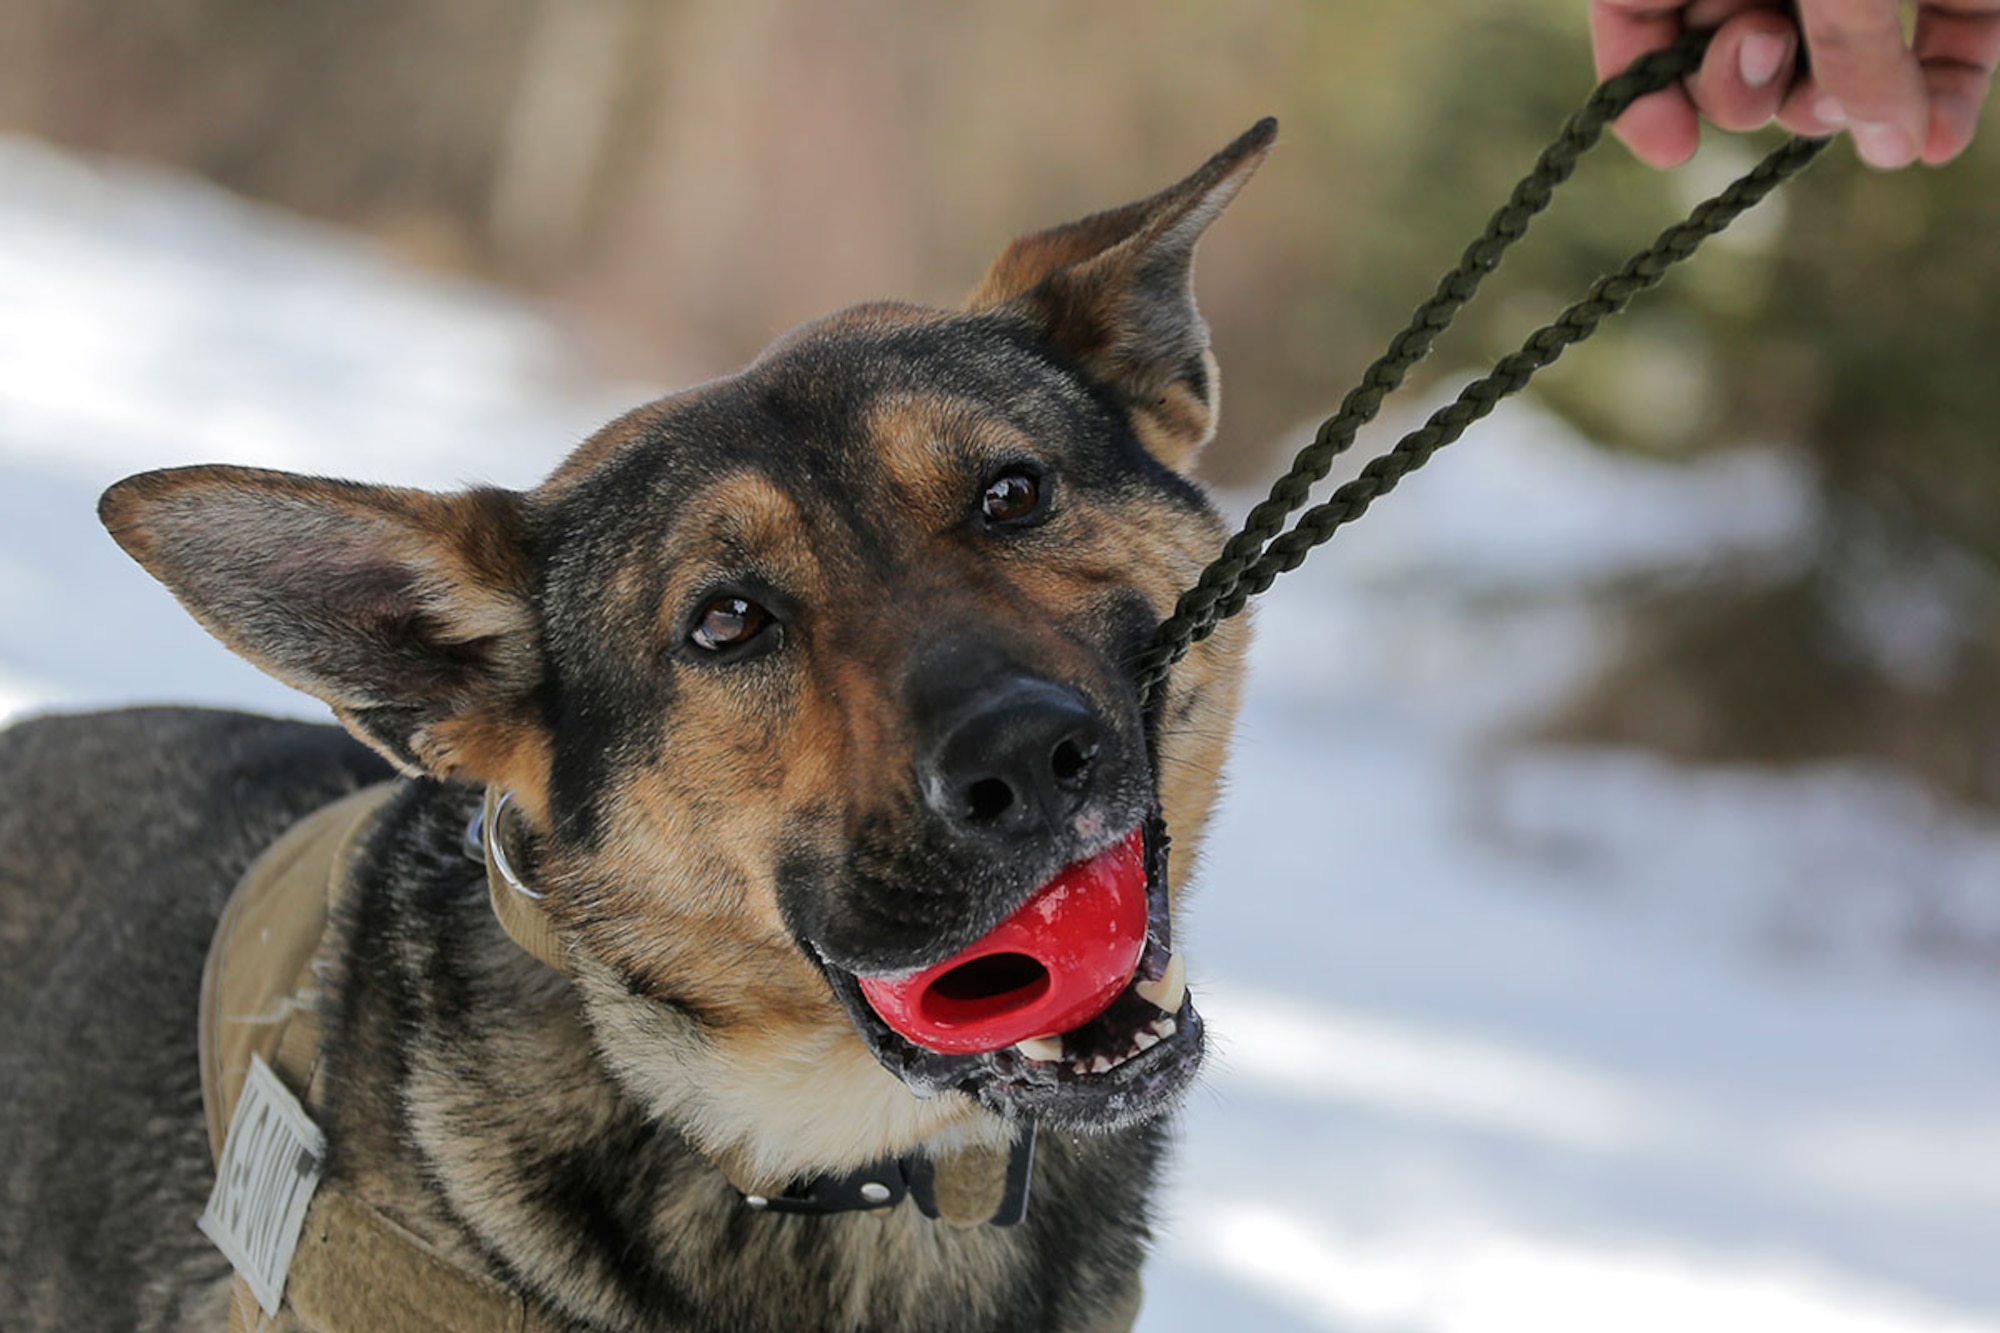 U.S. Army military working dog, Faro, assigned to the 549th Military Working Dog Detachment, chews on a toy after successfully detecting simulated hidden explosives during K-9 training at Joint Base Elmendorf-Richardson, Alaska, March 17, 2016. Military working dogs are trained to respond to various law enforcement emergencies as well as detect hidden narcotics and explosives. (U.S. Air Force photo/Alejandro Peña)